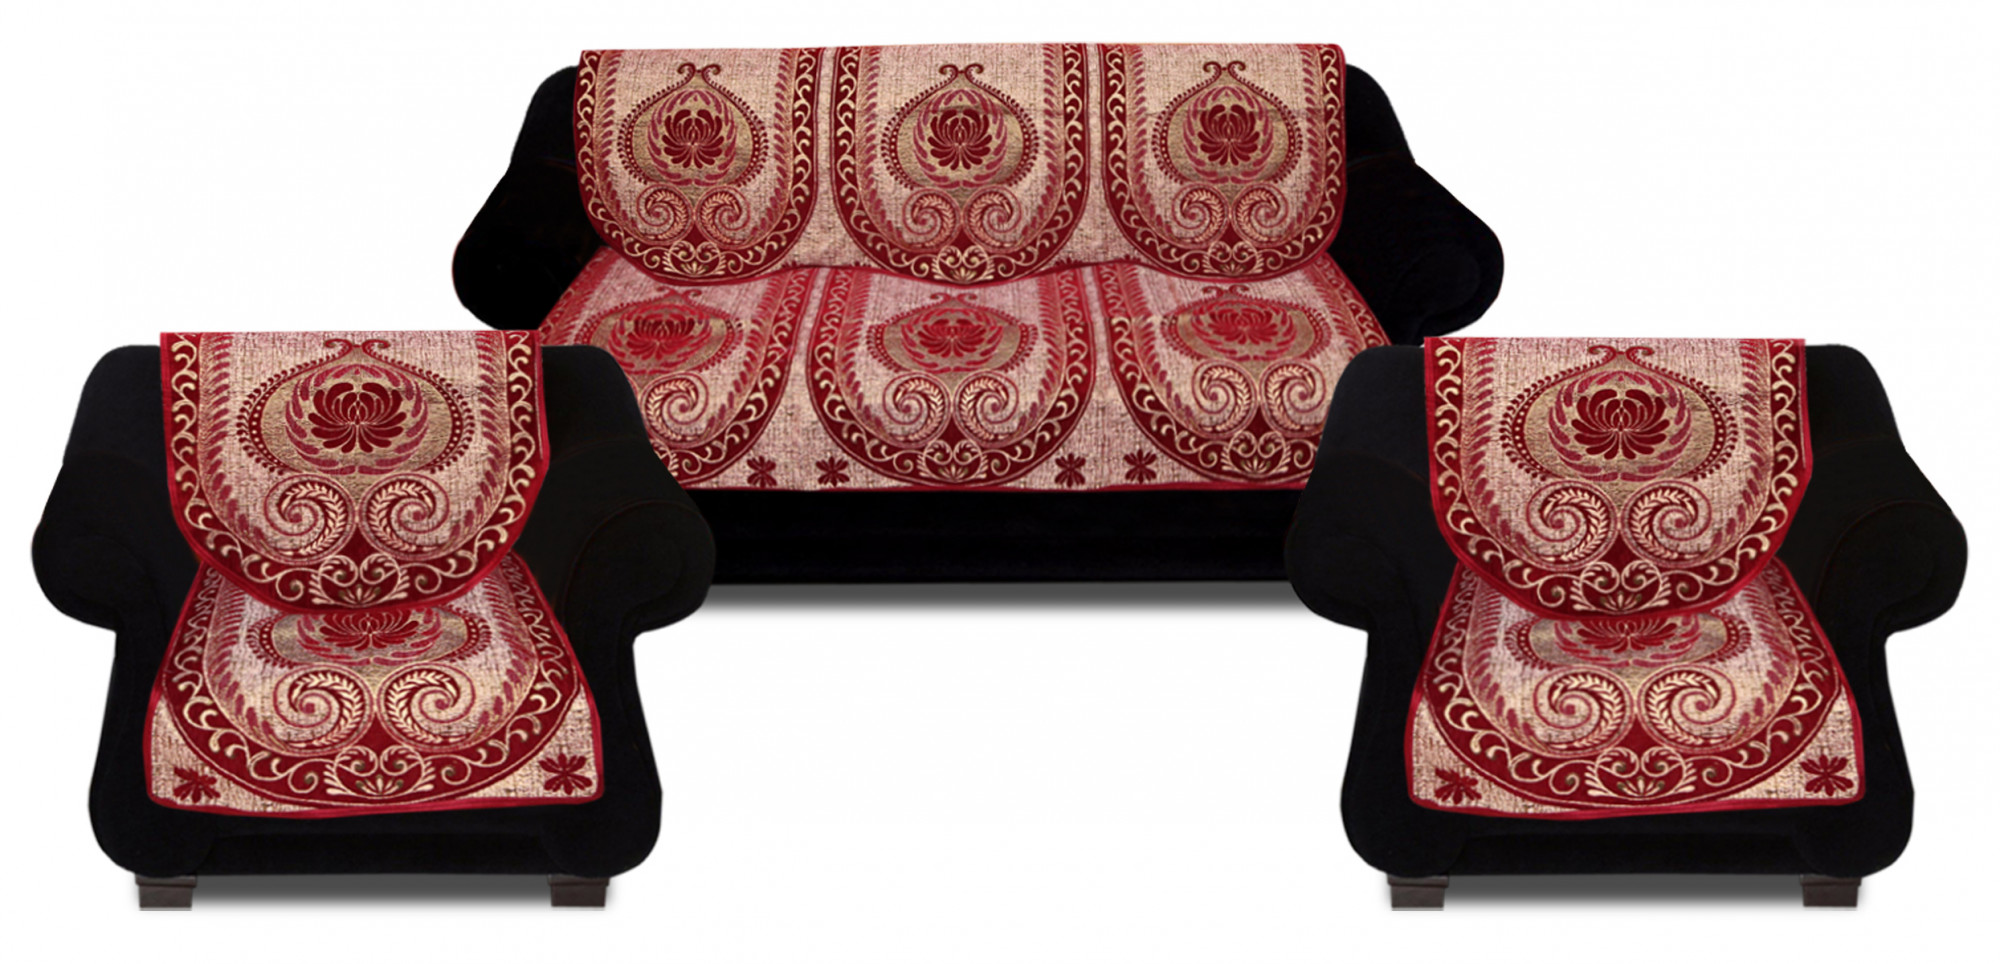 Kuber Industries Luxurious Cotton Damask Design 5 Seater Sofa Cover Set for Living Room (Red)